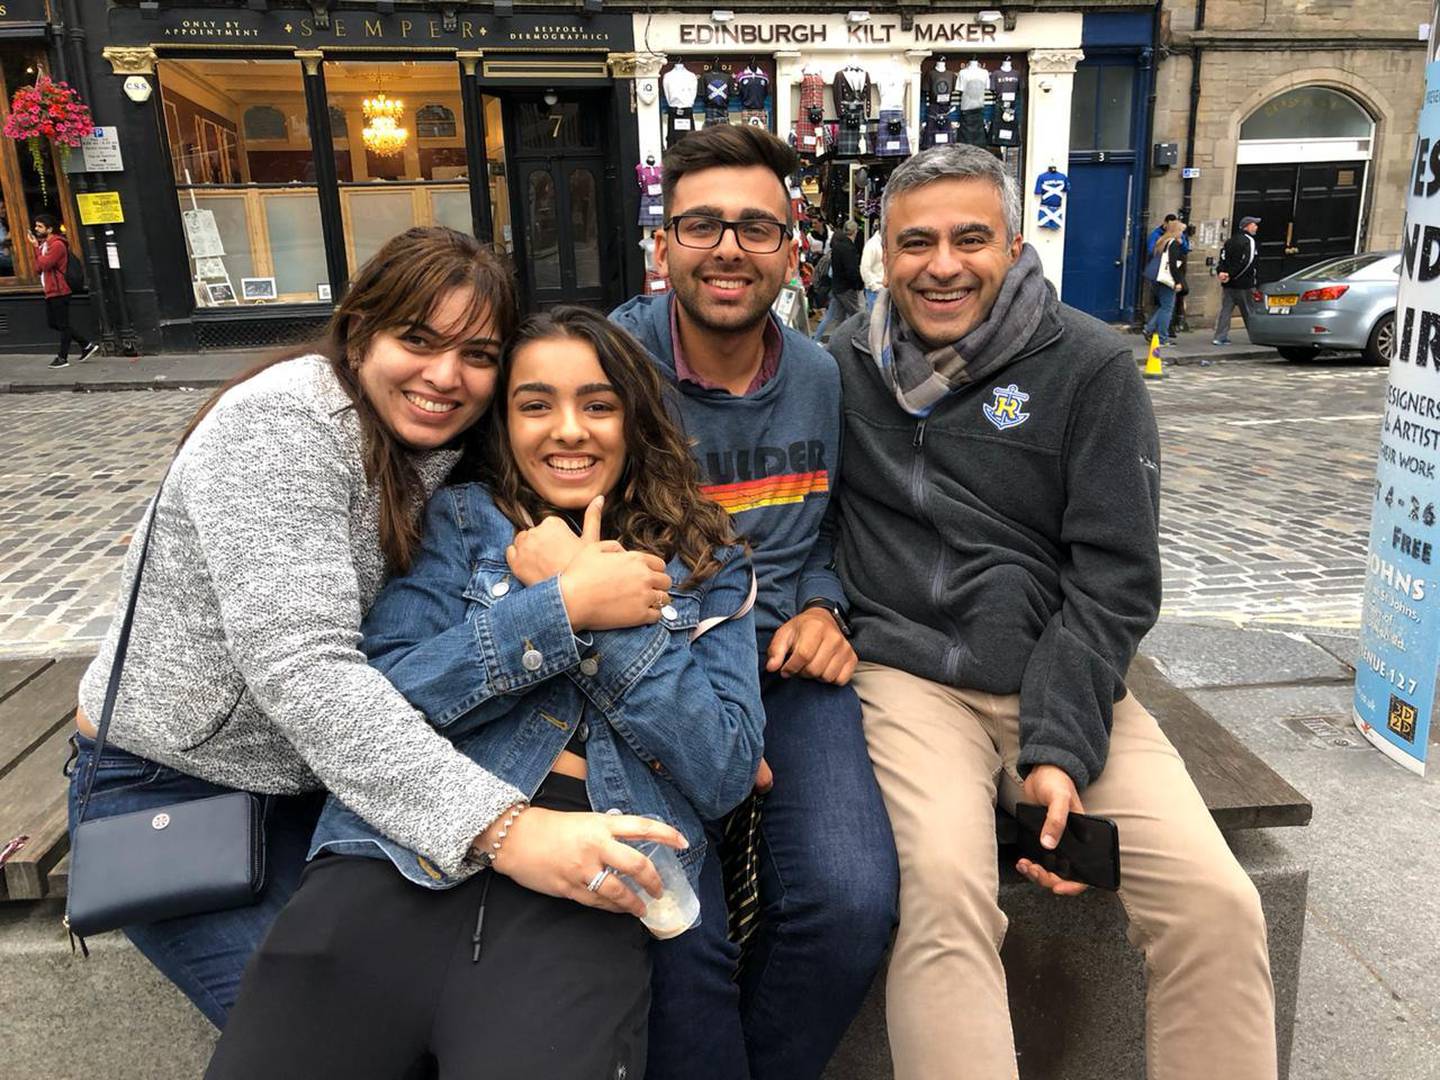 Dolly Lalvani, left, and her family on holiday in Edinburgh